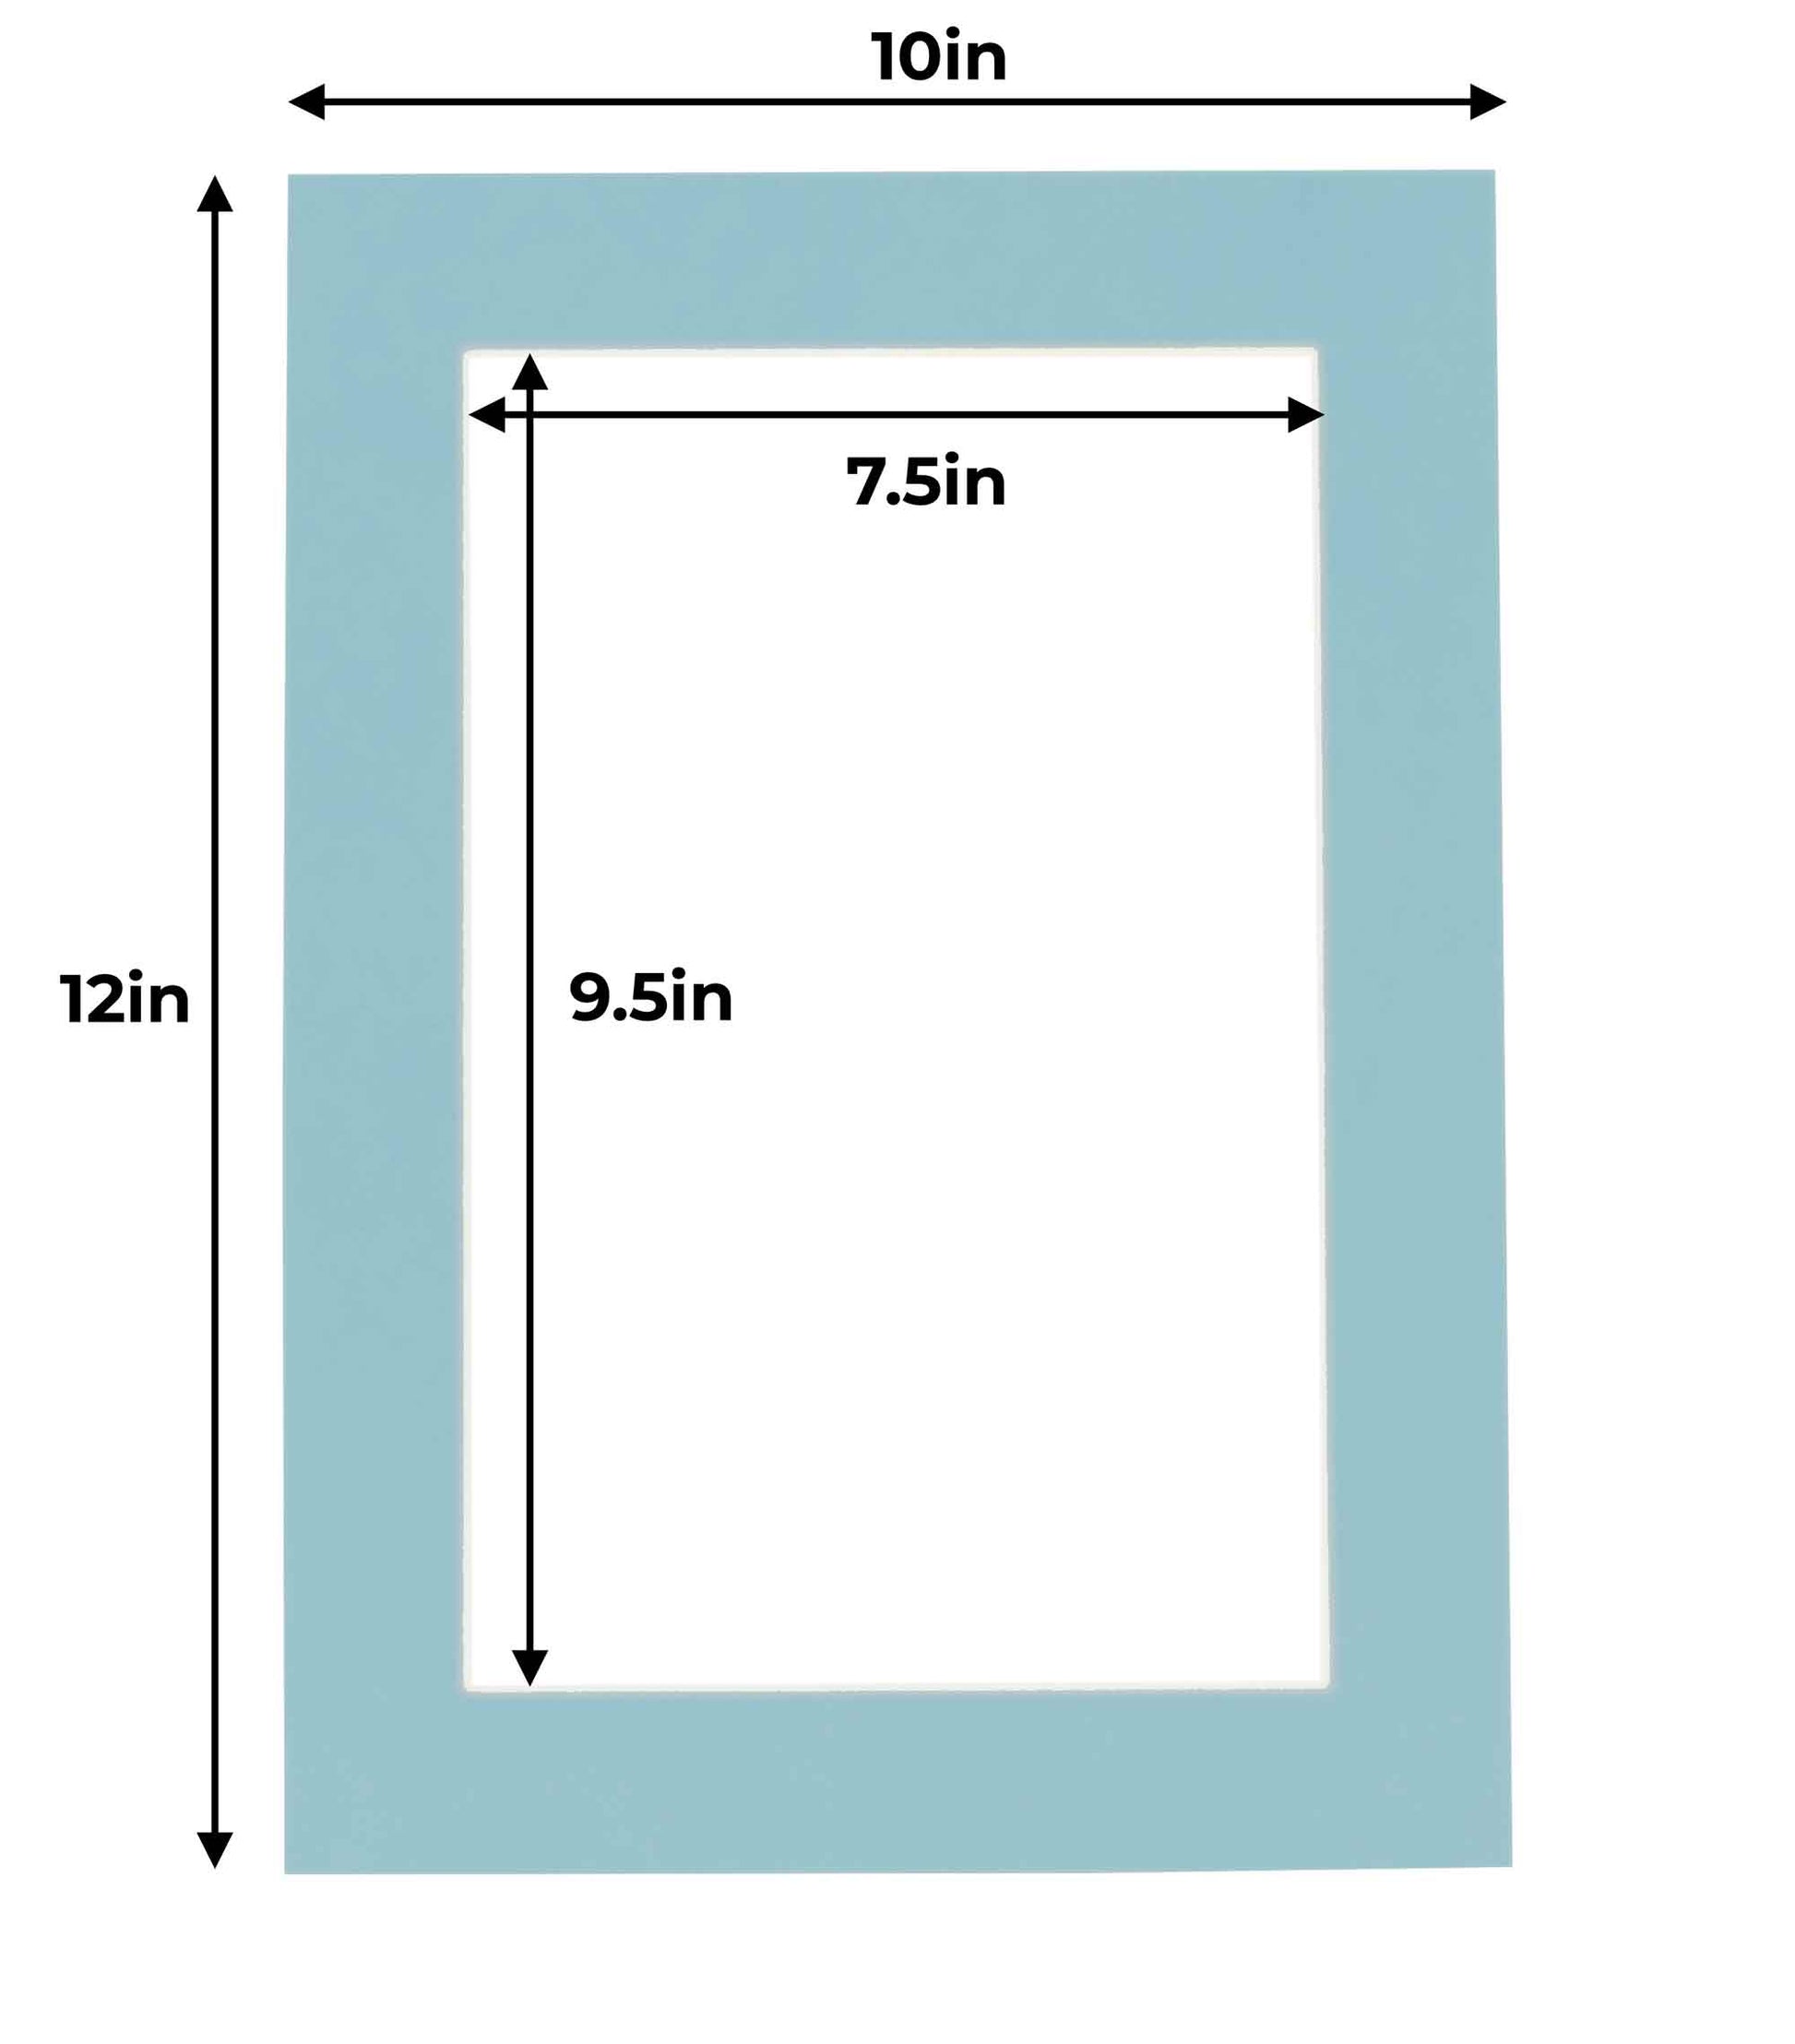 5x7 White Picture Mats with White Core for 4x6 Pictures - Fits 5x7 Frame, Aqua Blue